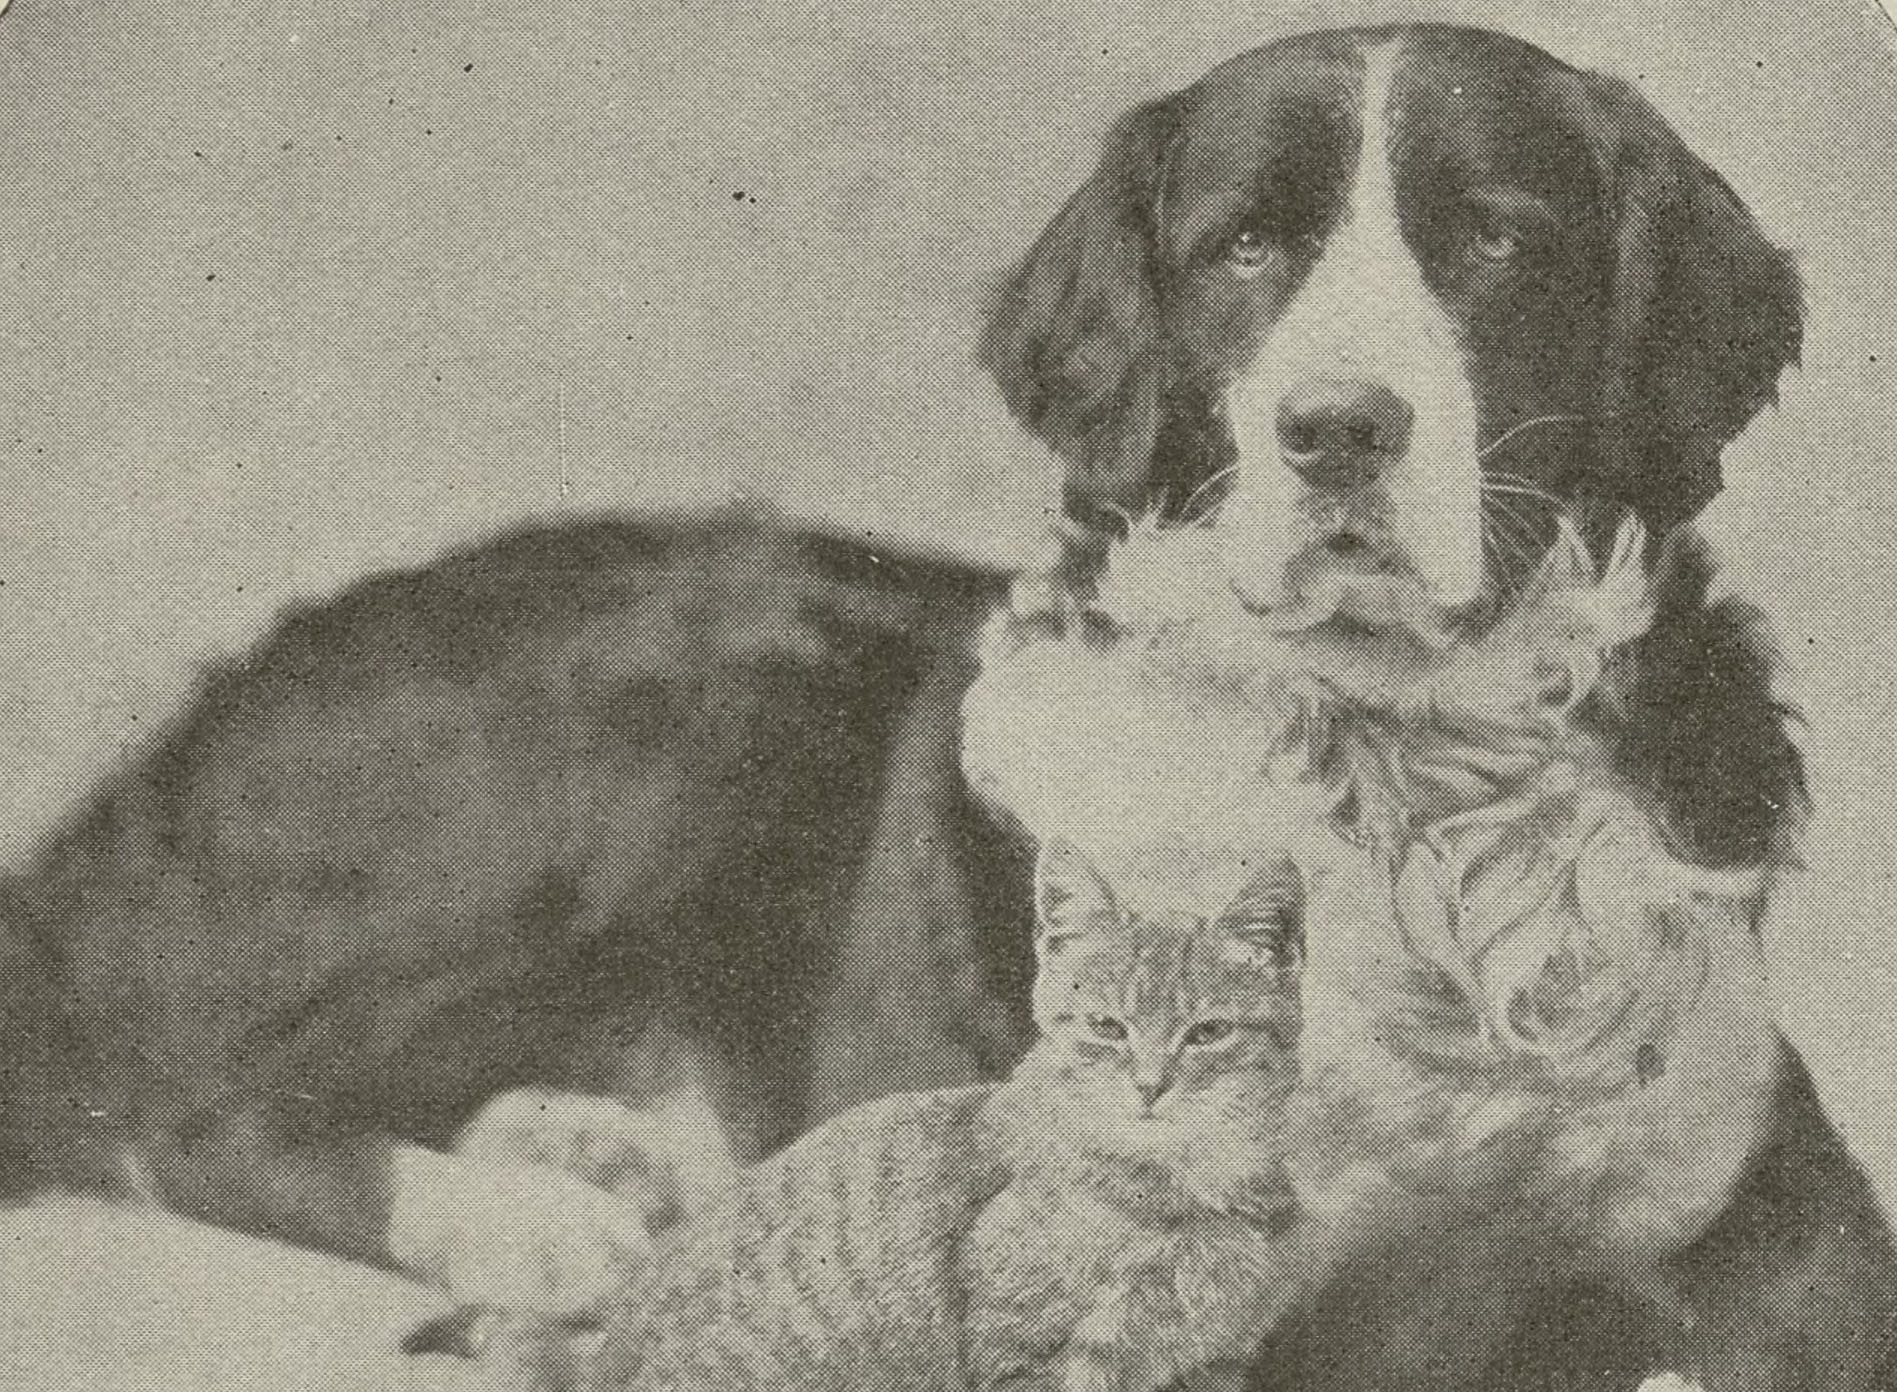 Dog and cat from "A Letter to Children." From John Ptak Collection of Animal Rights and Animal Welfare Printed Education Materials.